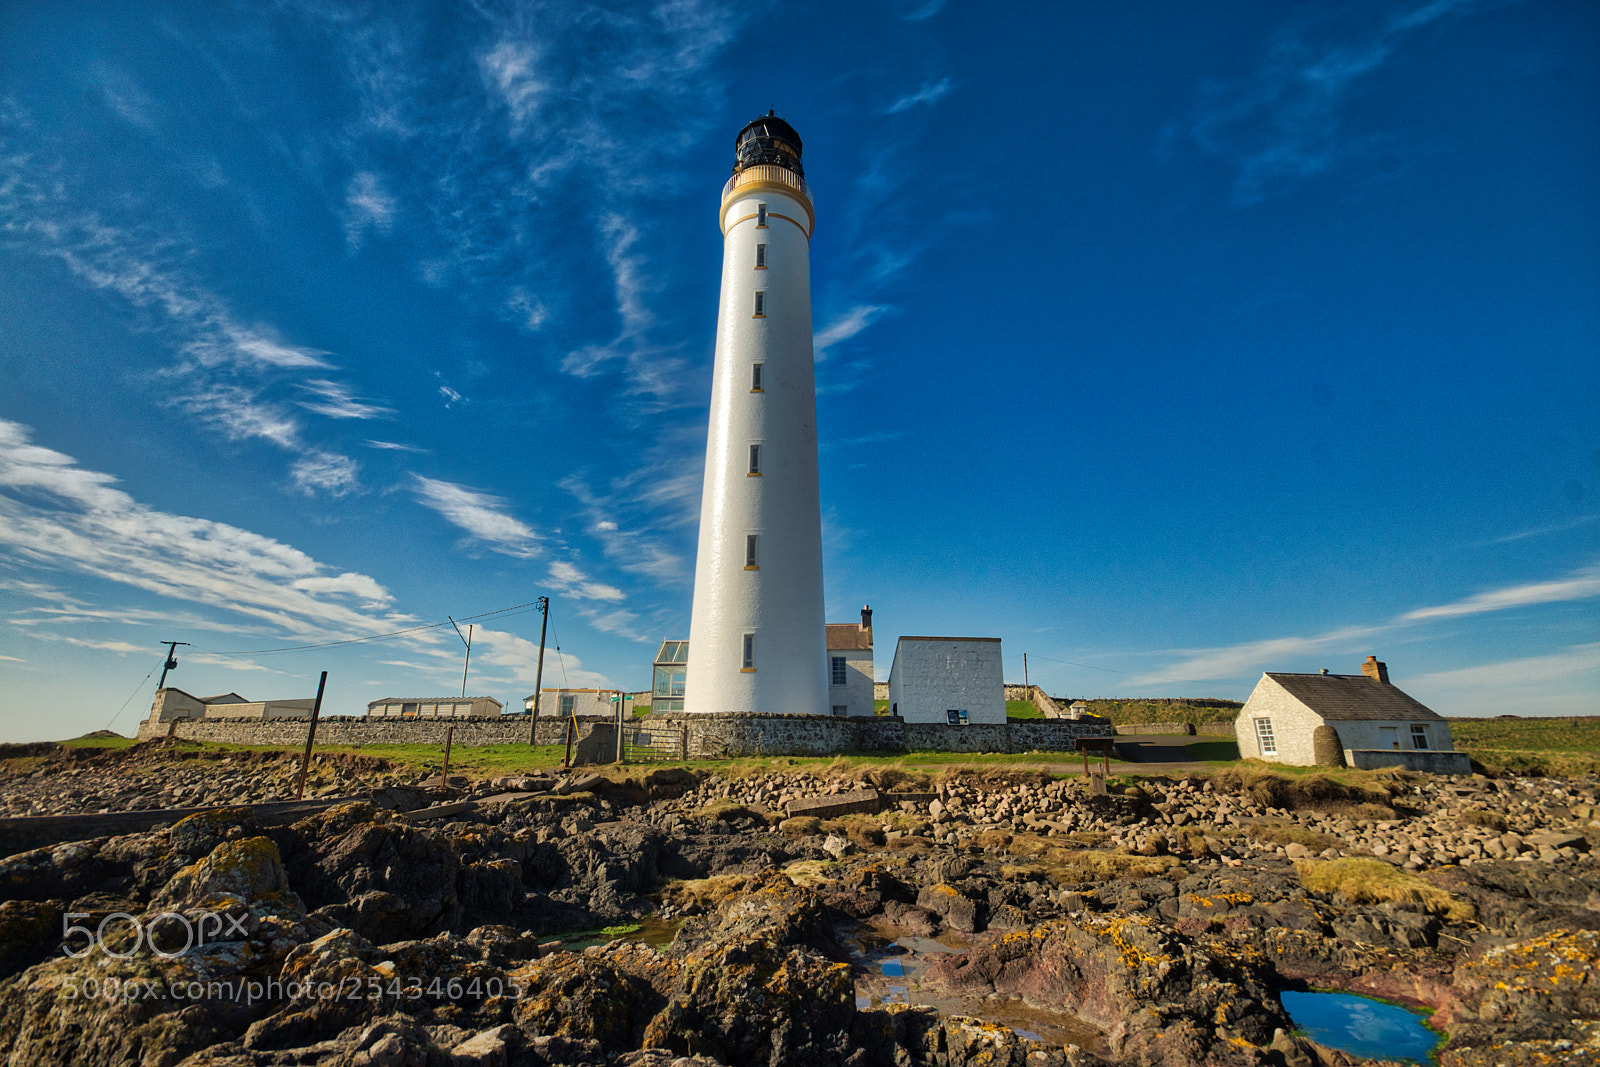 Sony SLT-A77 sample photo. Scurdie ness lighthouse photography